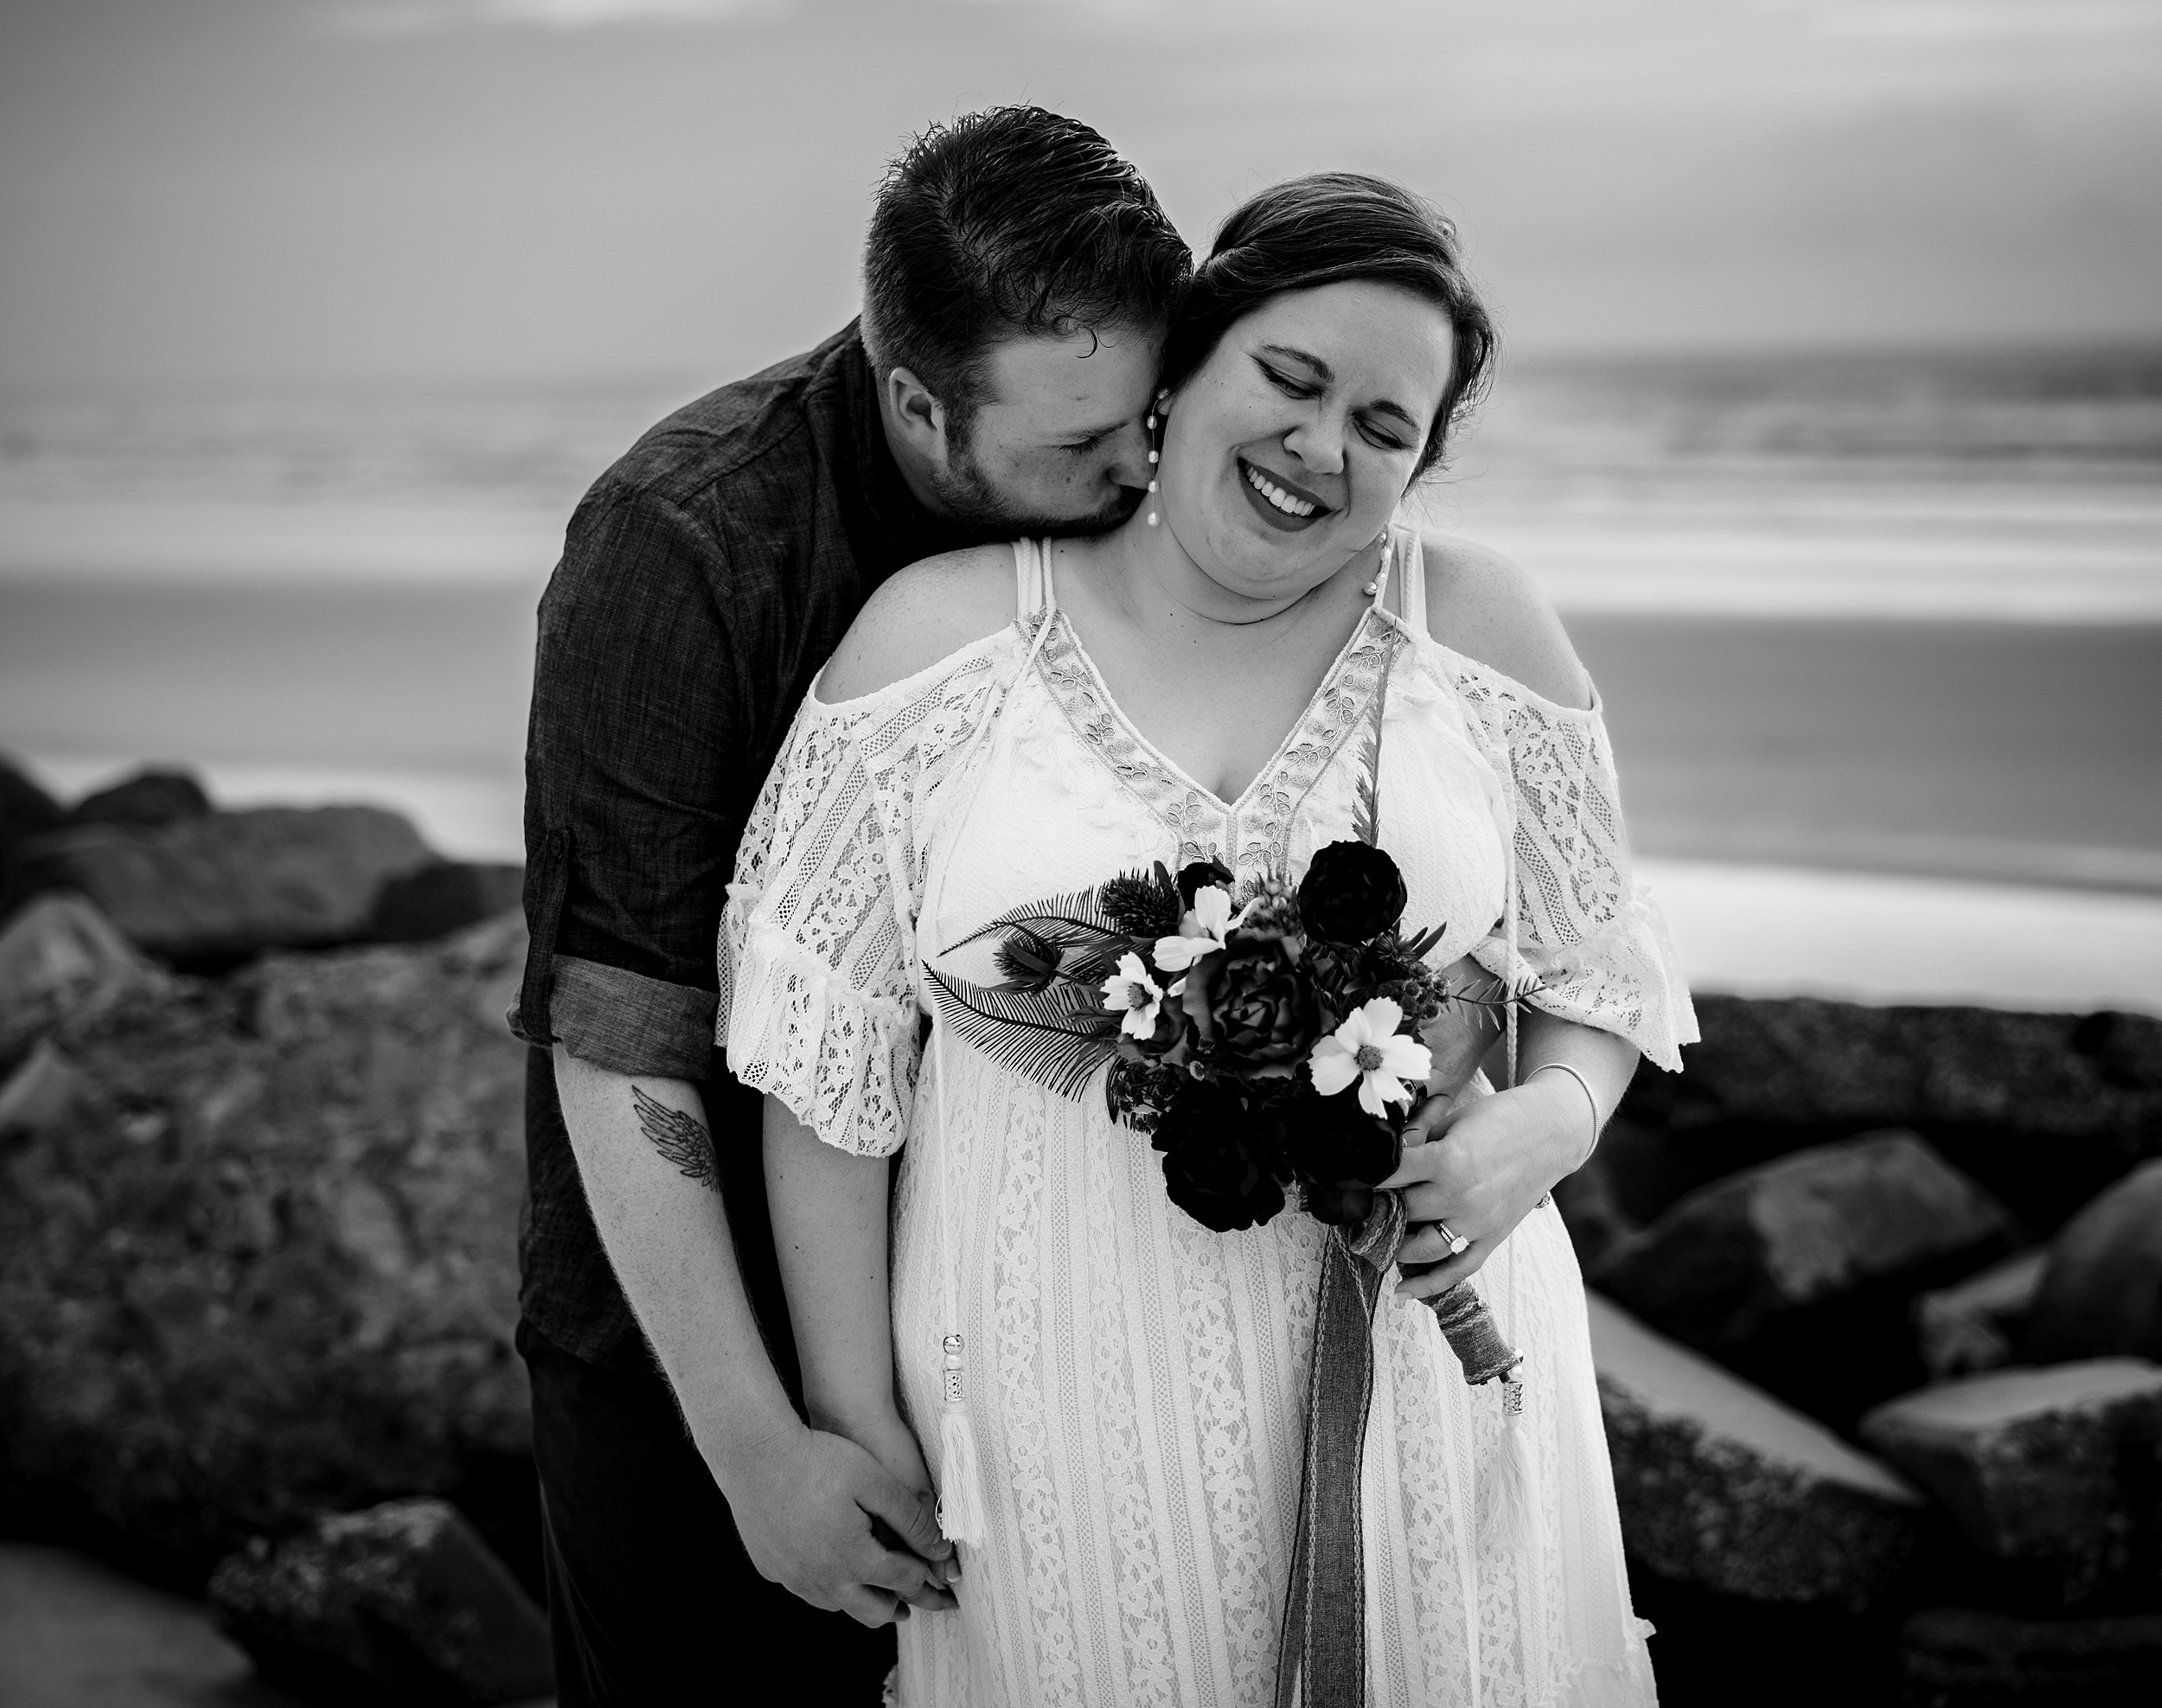 A groom kisses the neck of his bride as she laughs on a beach at sunset at their st augustine beach wedding venues